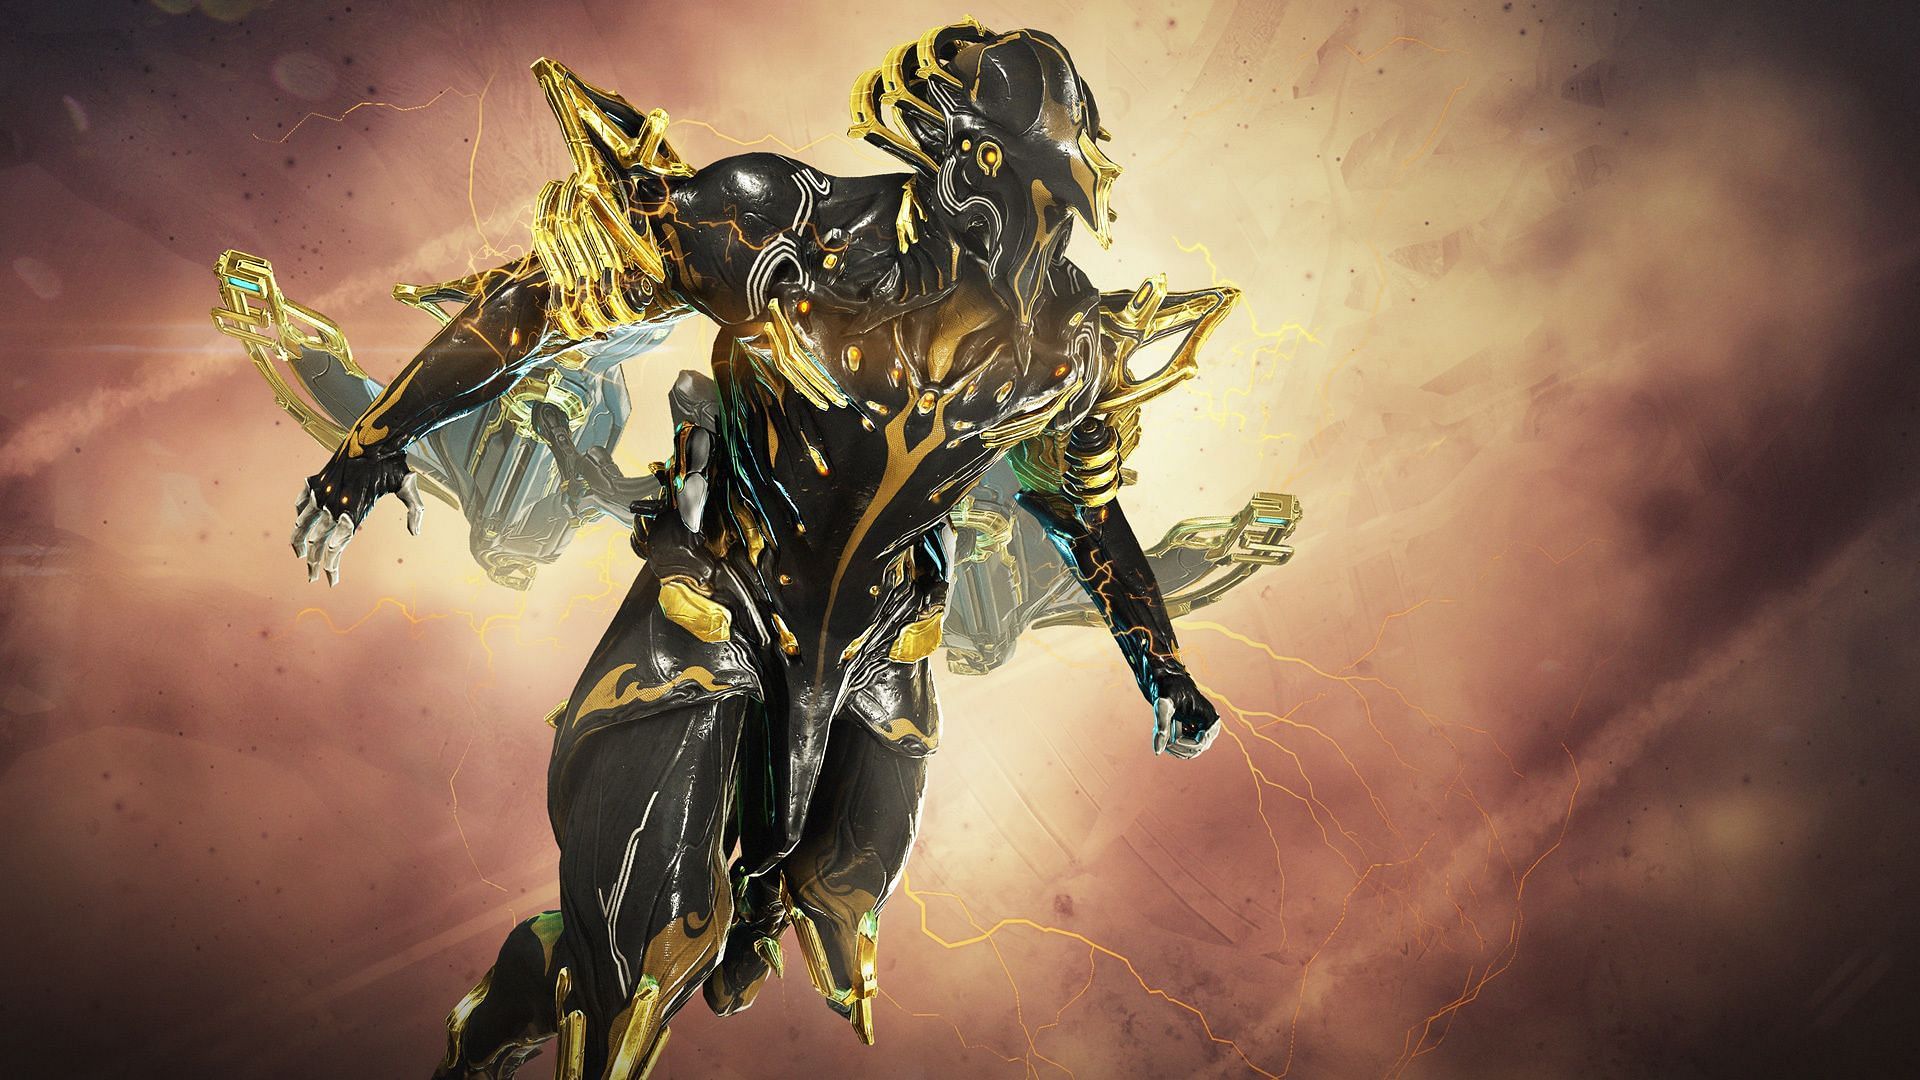 Odonata is the only Archwing in Warframe to have a Primed variant. (Image via Digital Extremes)